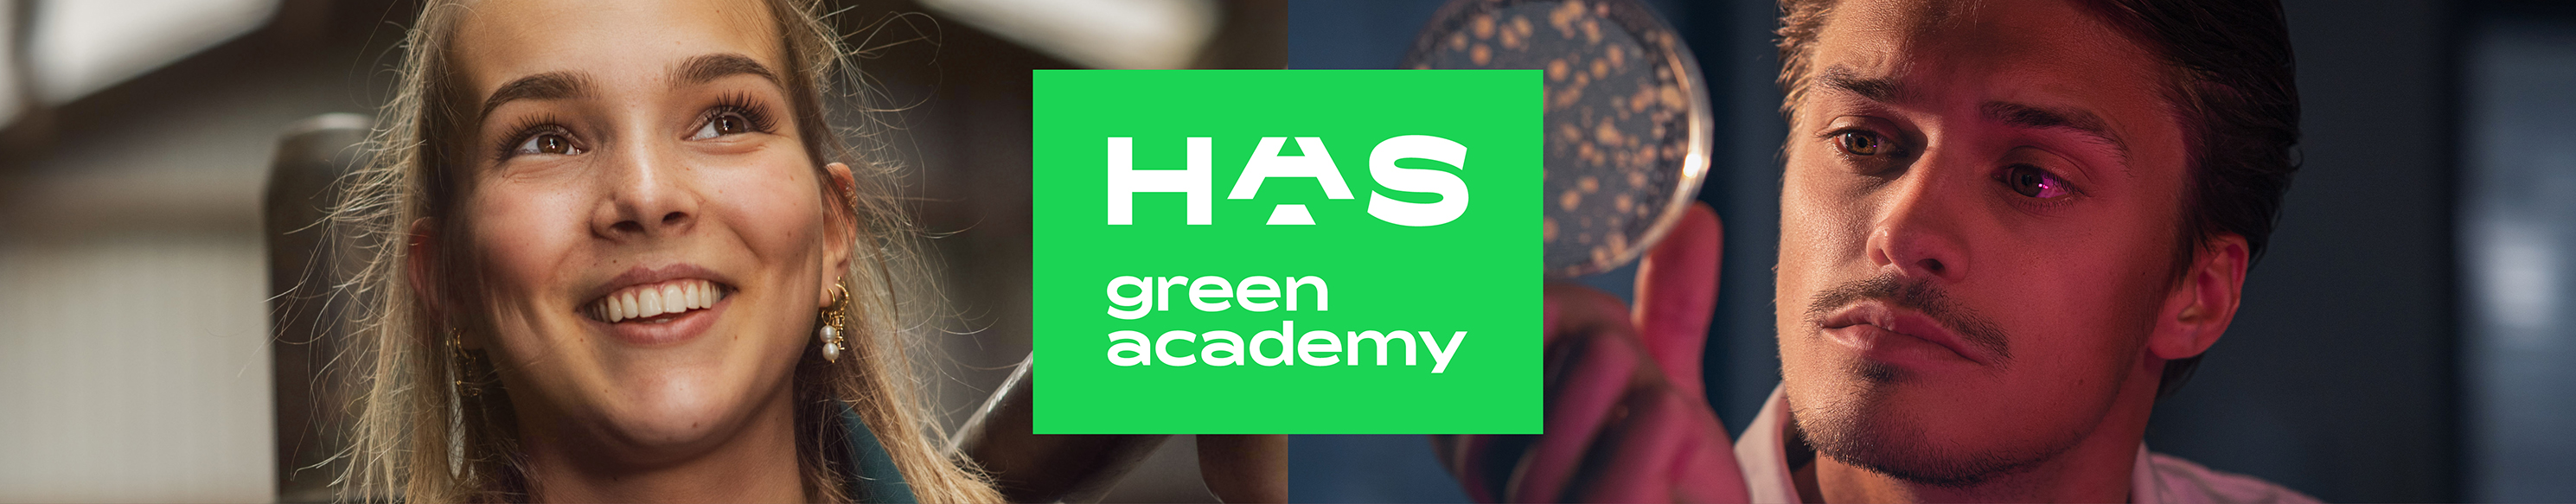 HAS Green Academy (University of Applied Sciences)